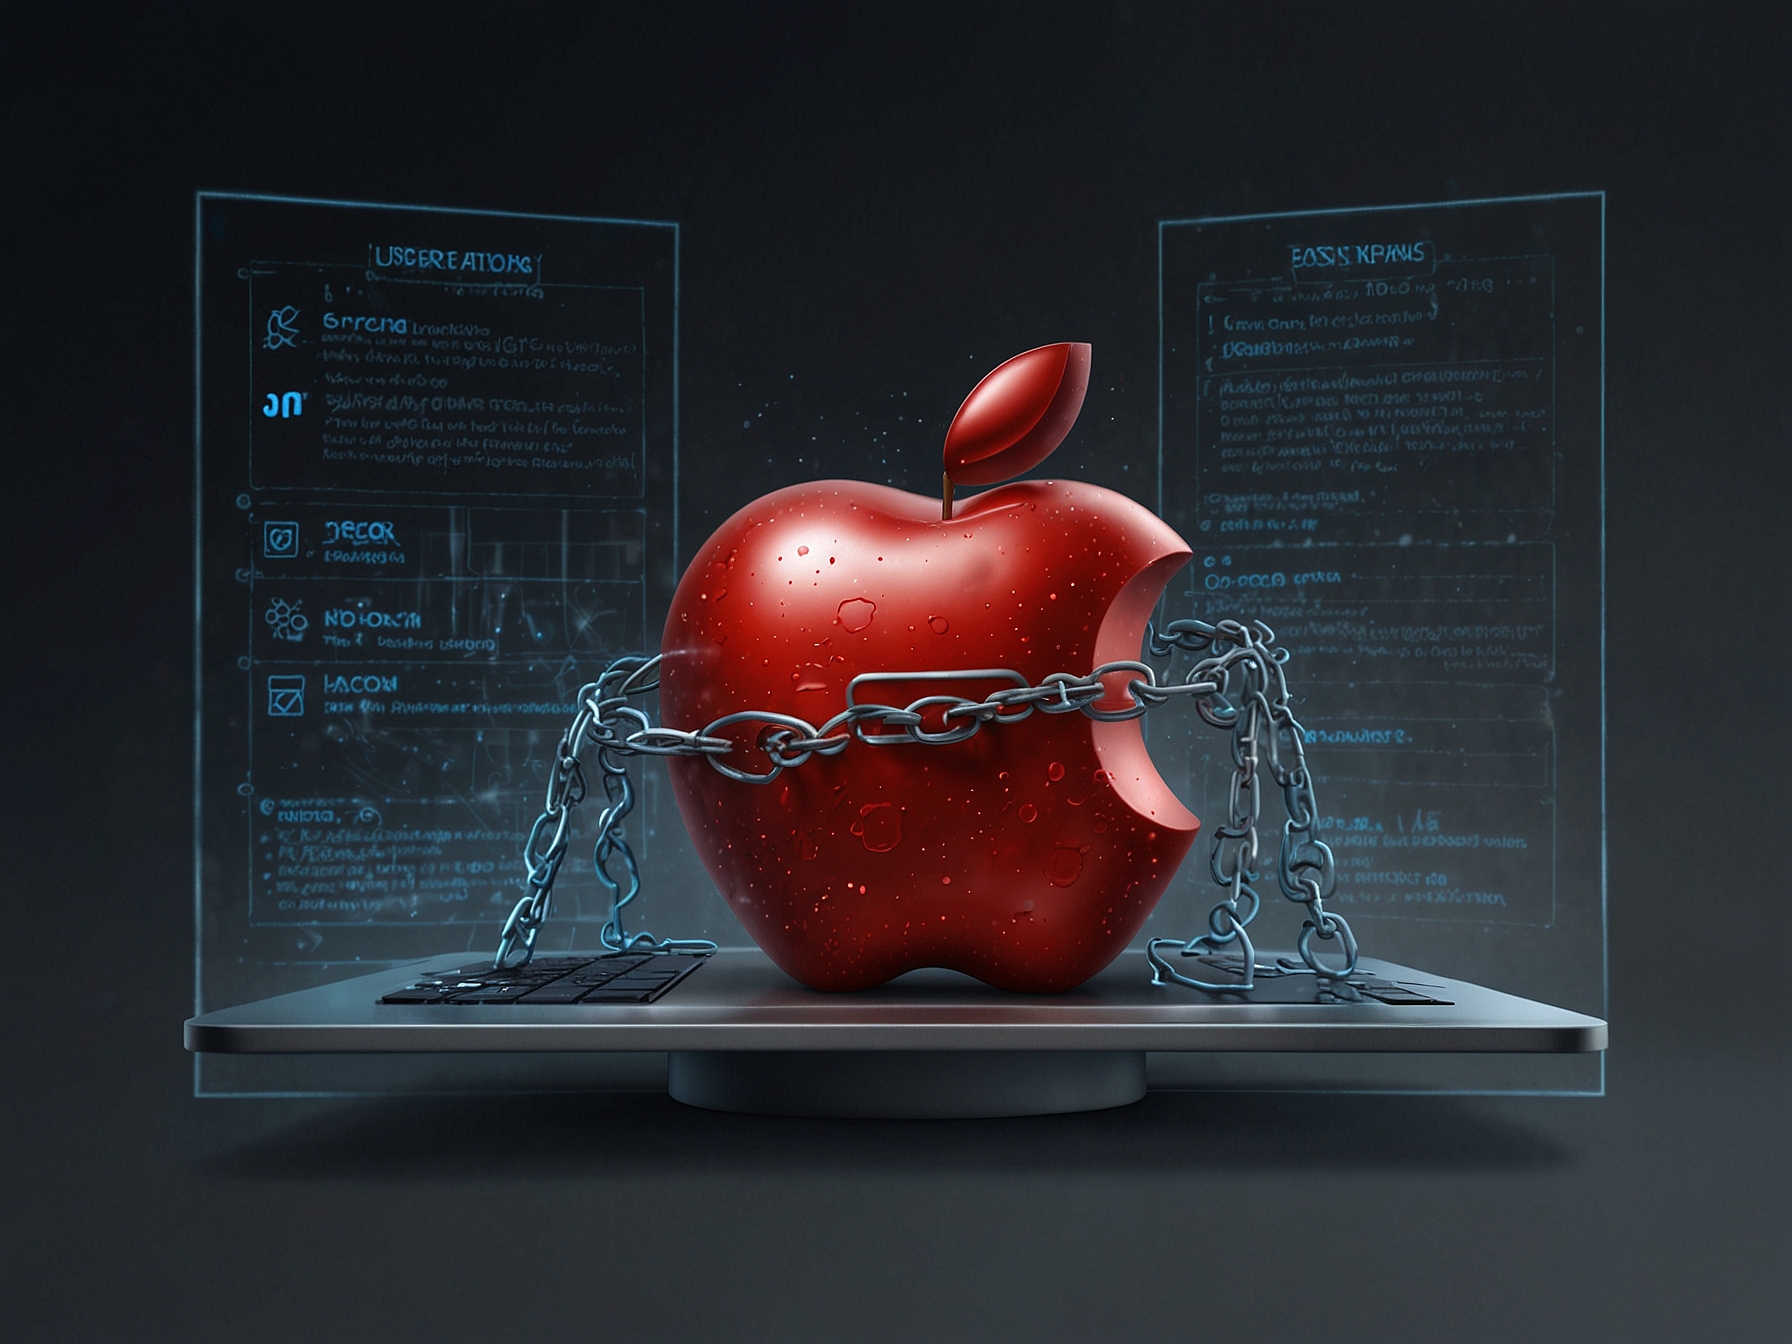 Graphic depiction of the GDPR regulations intertwining with AI technology, symbolizing the challenges faced by Apple in balancing data privacy with innovative functionalities.